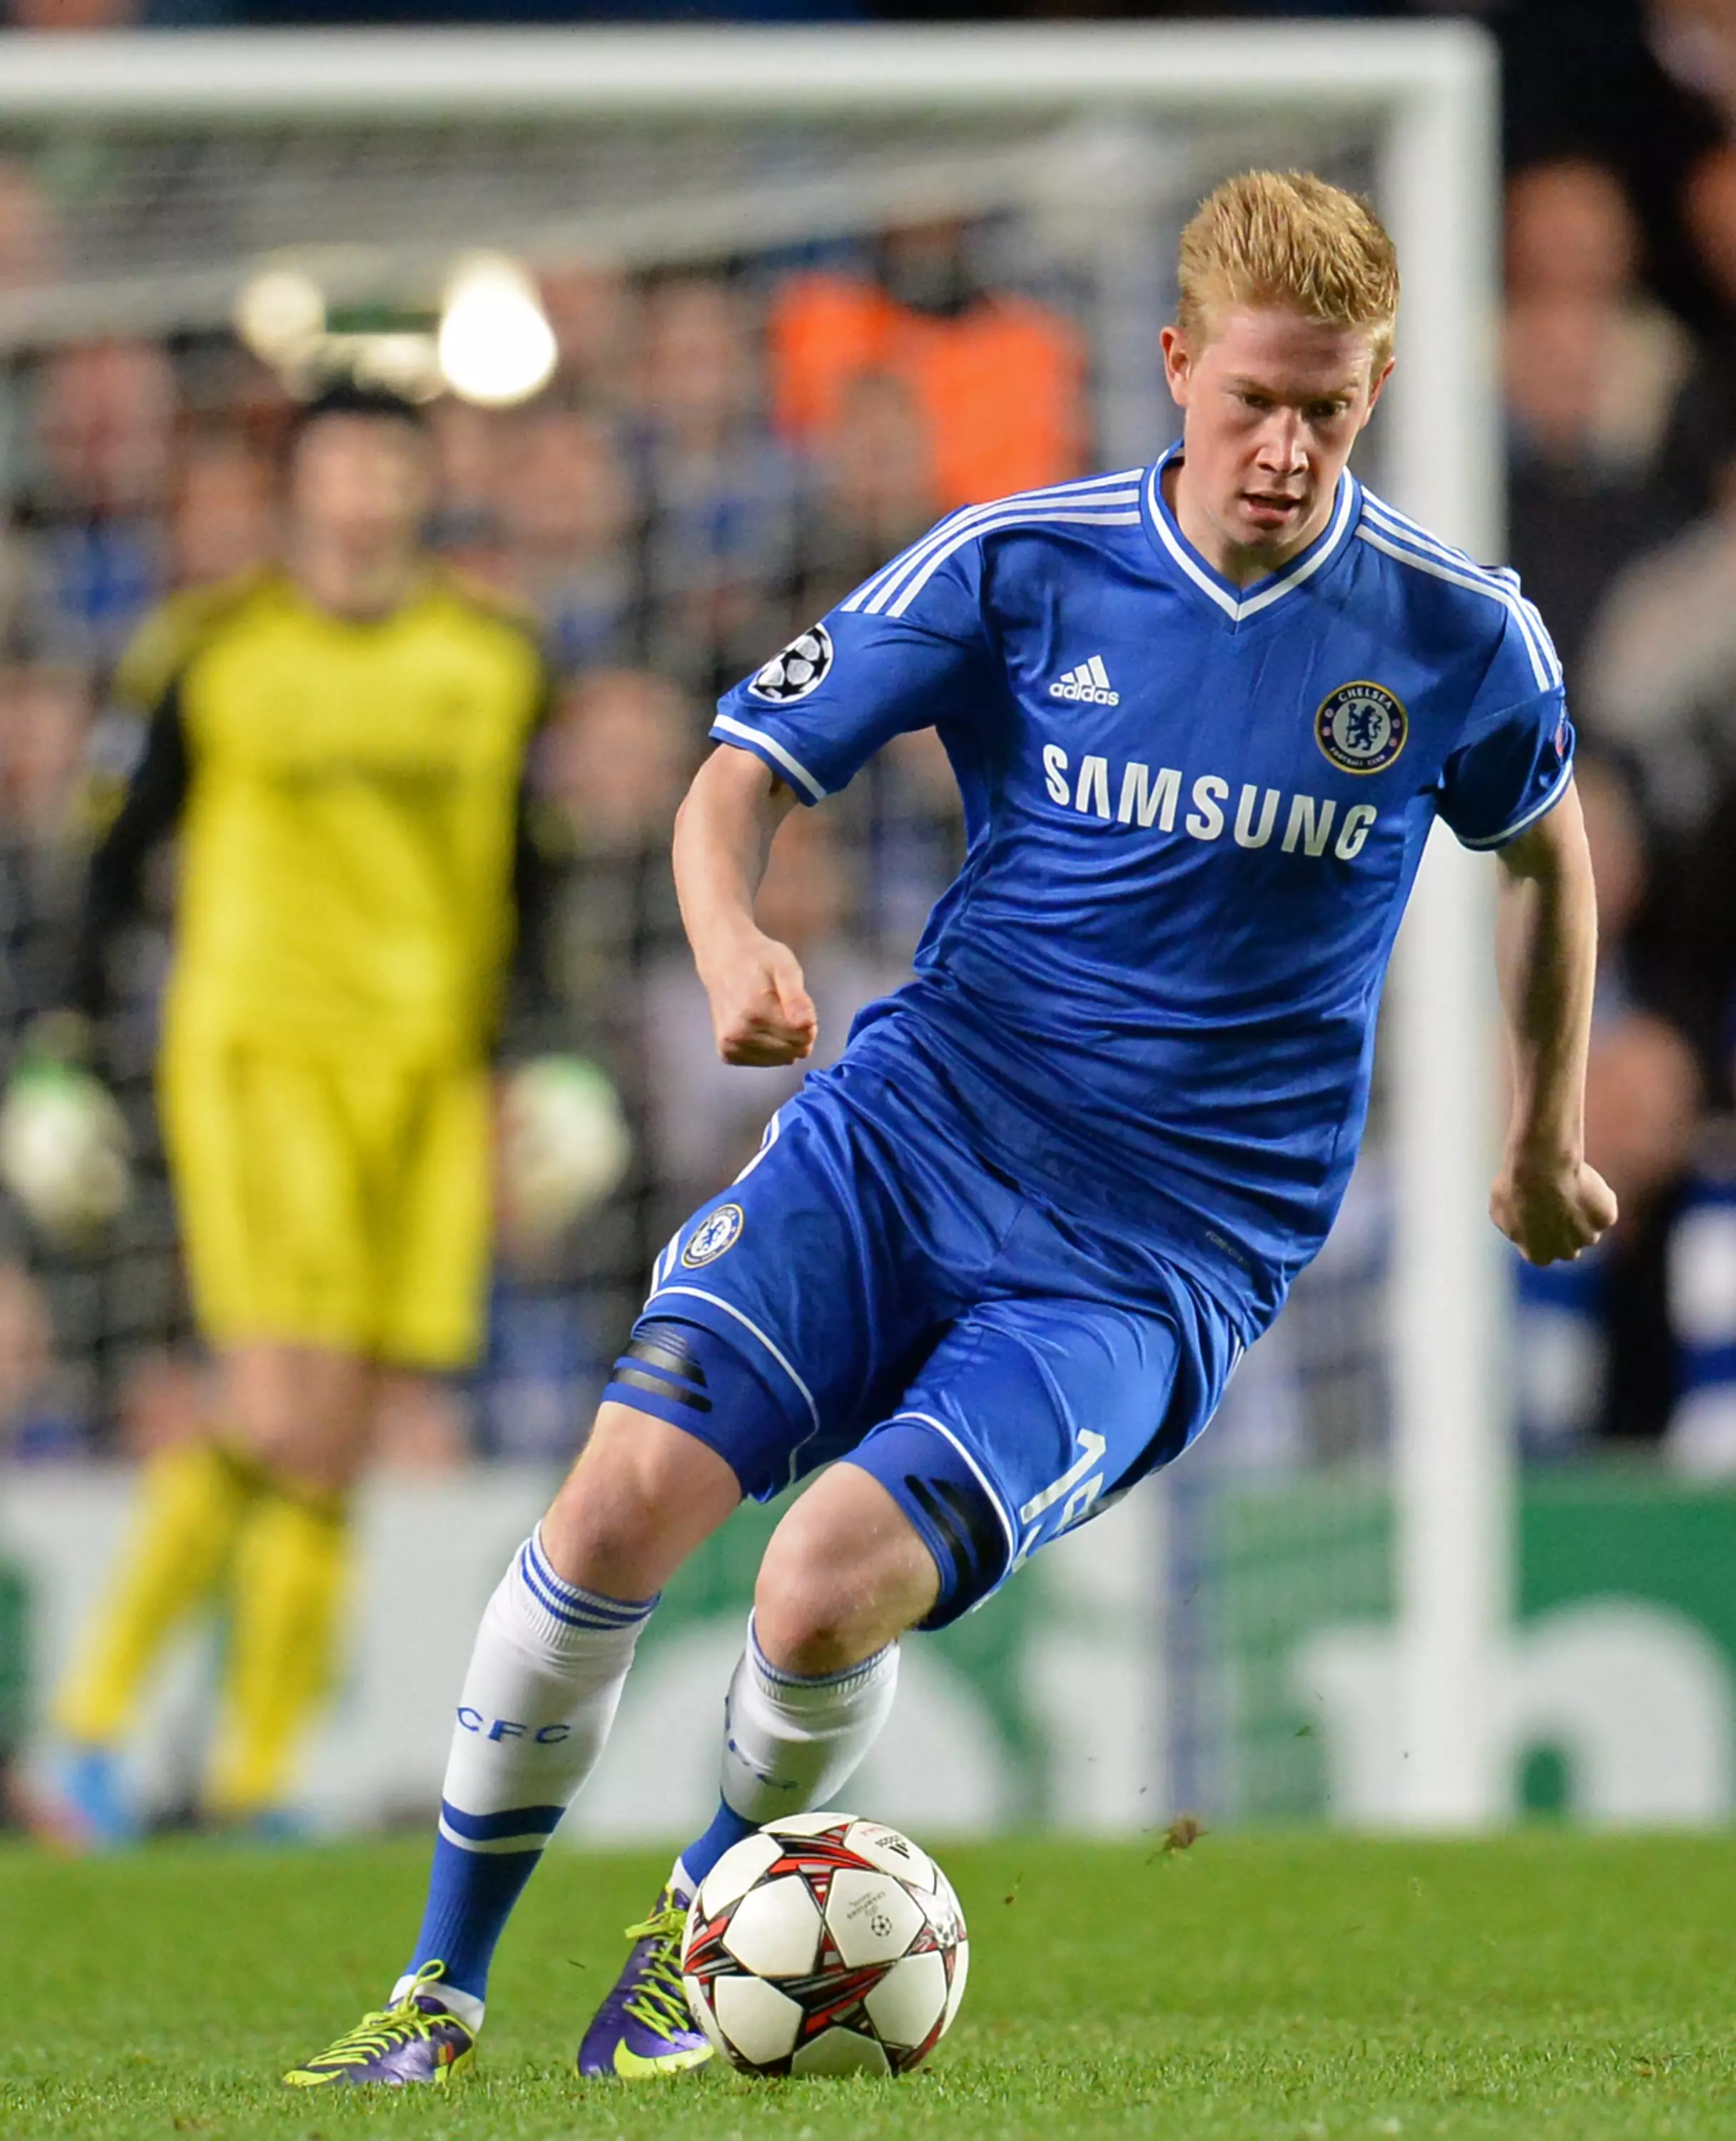 De Bruyne also made several substitute appearances in the Champions League for Chelsea. Image: PA